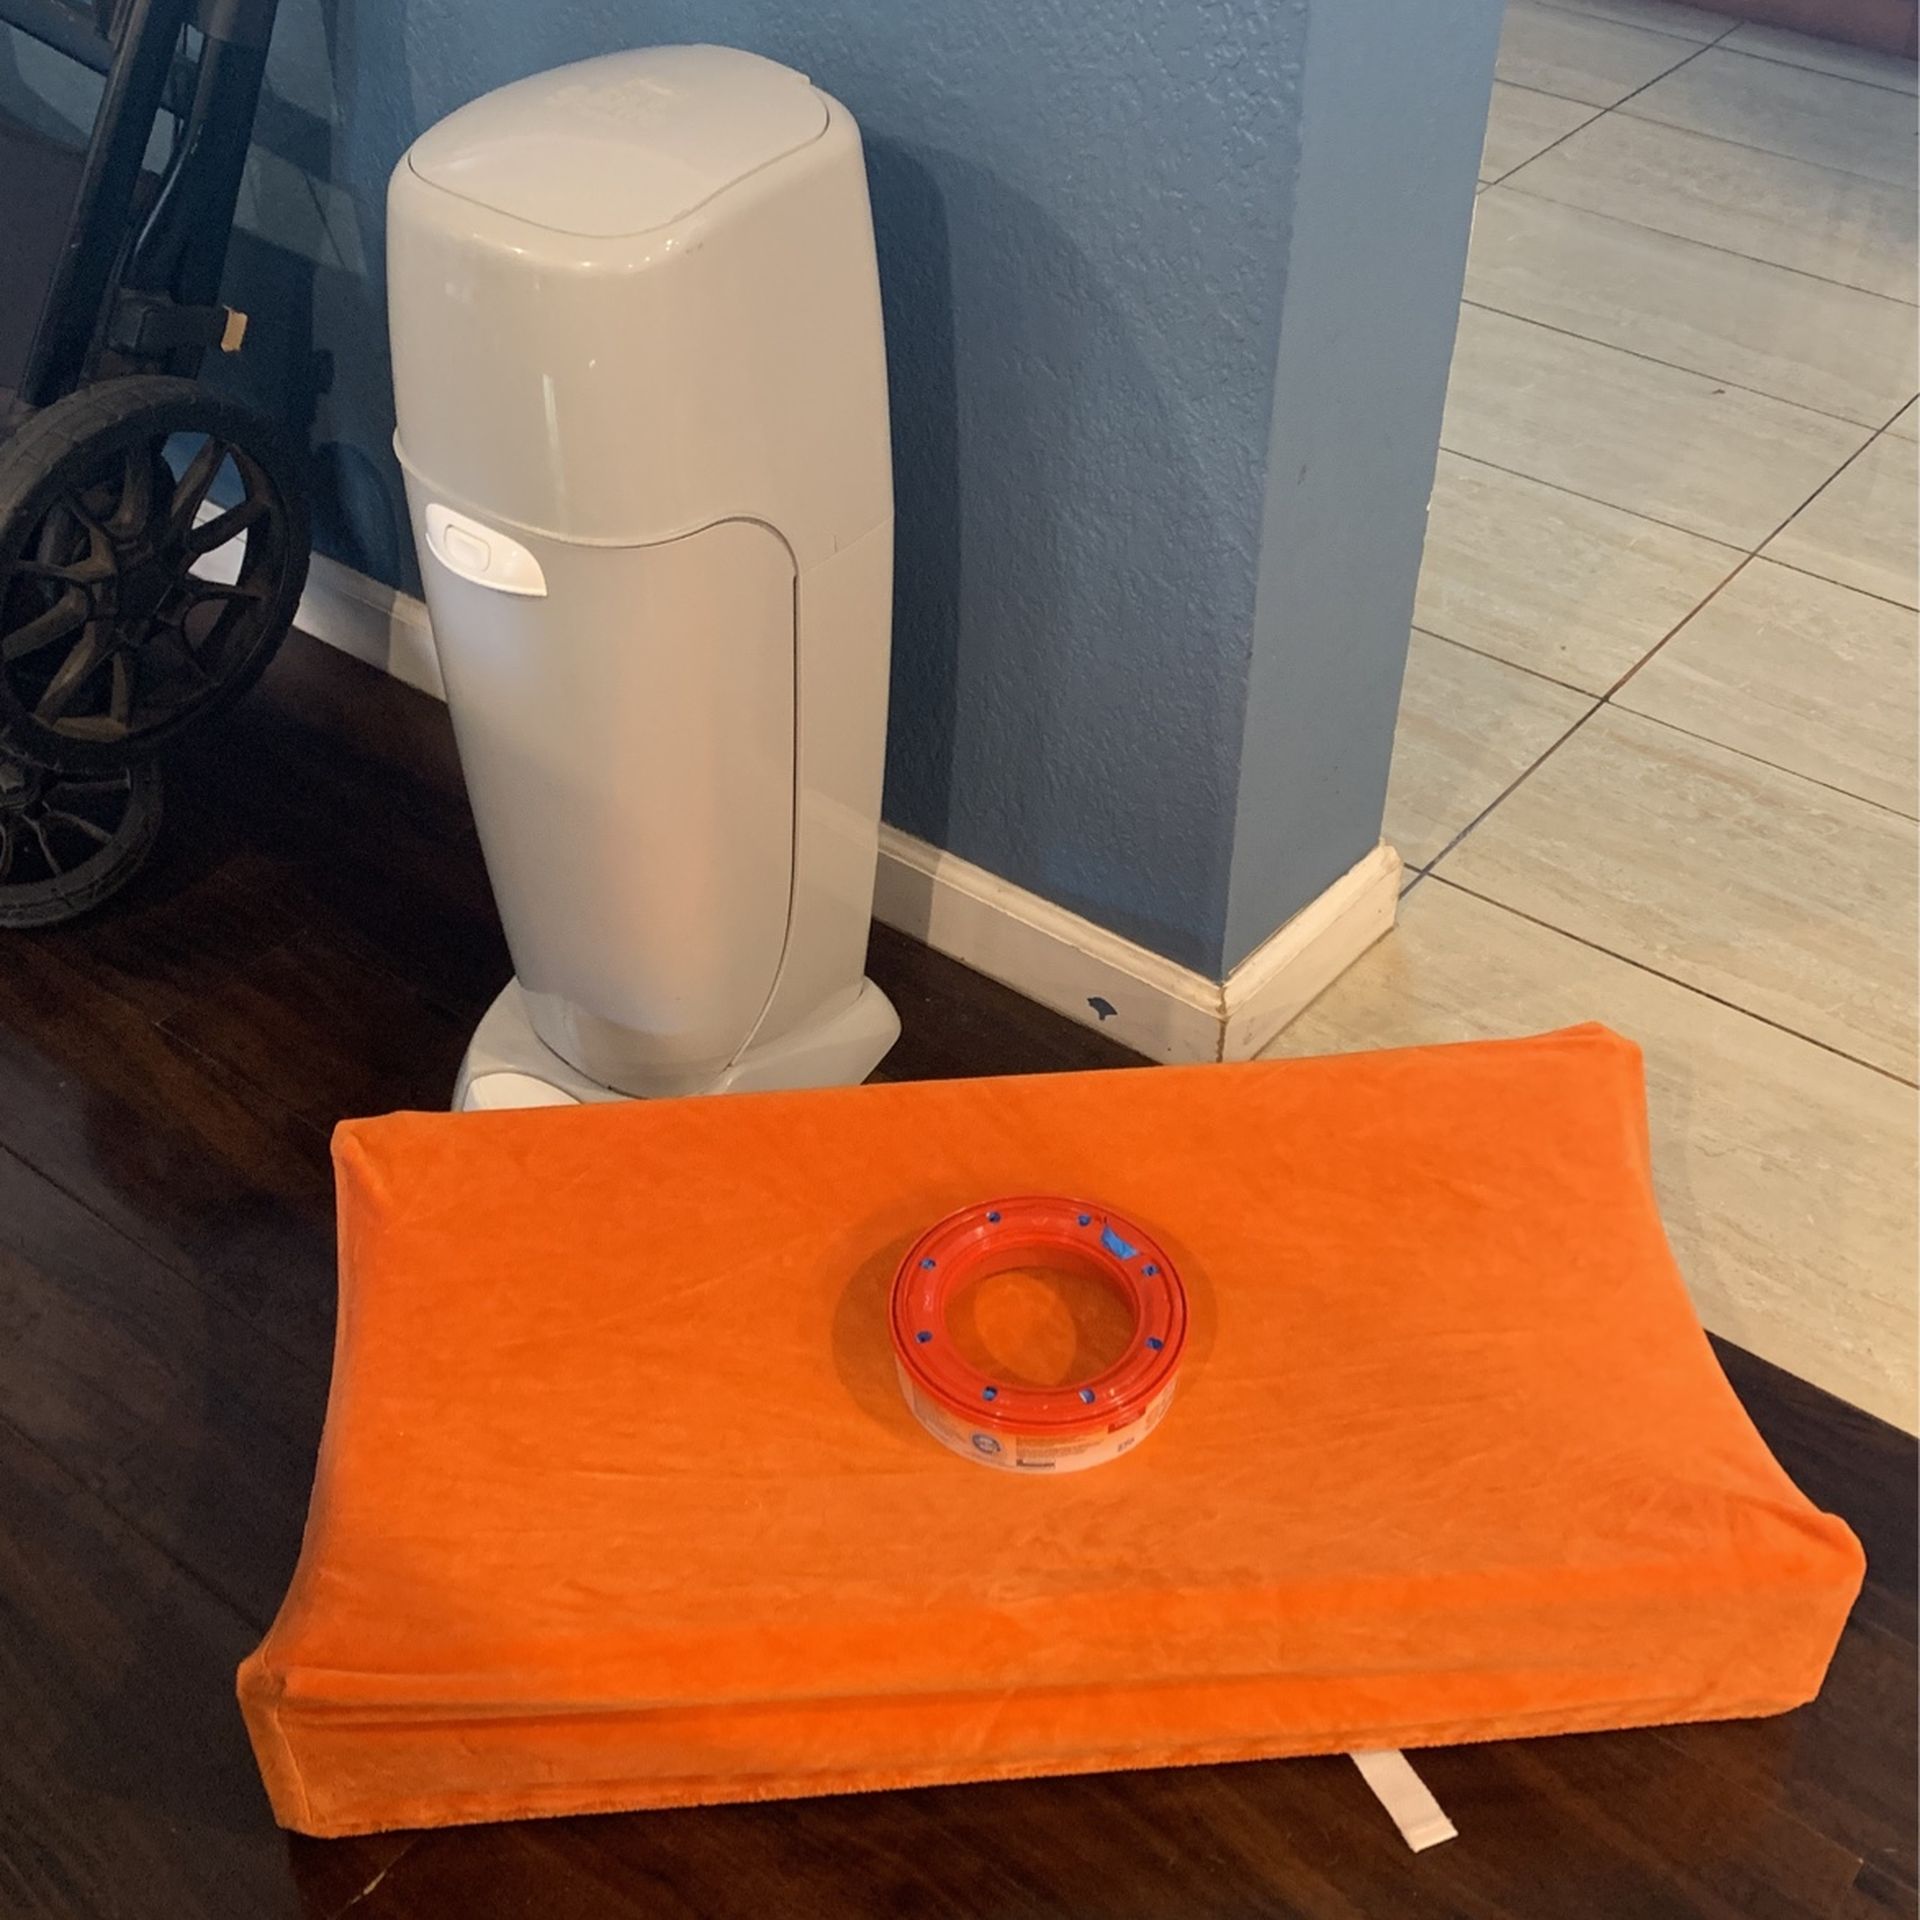 Diaper Genie, 1.5 Refills, Changing Table Sturdy Pad, Changing Table Orange Cover